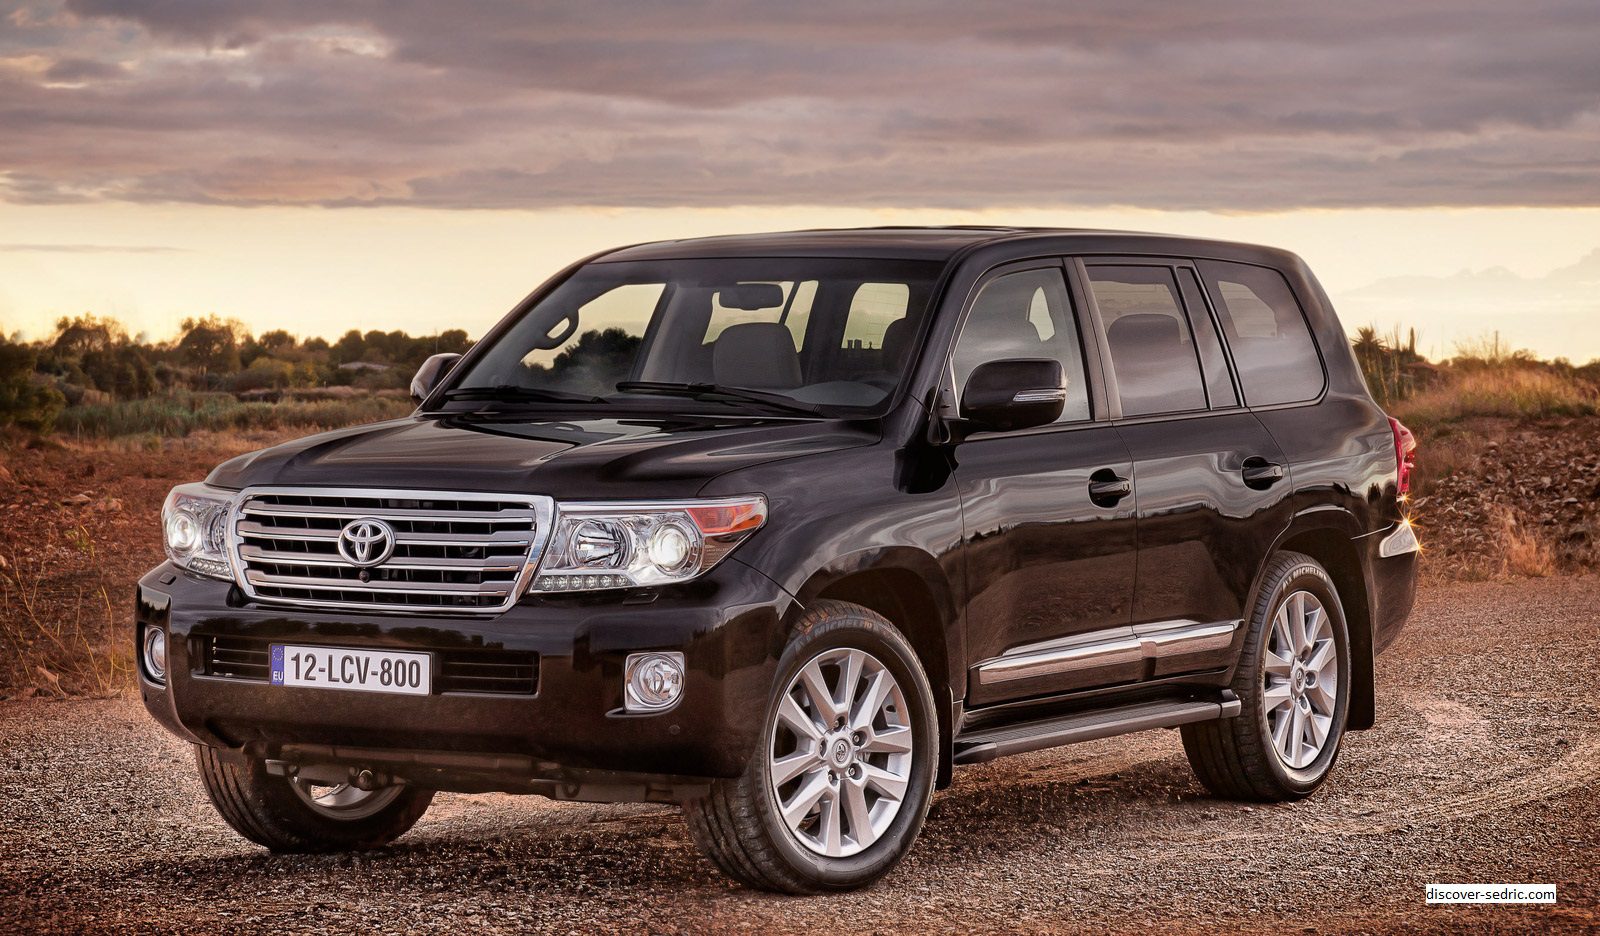 Why Are Toyota Land Cruisers So Expensive?